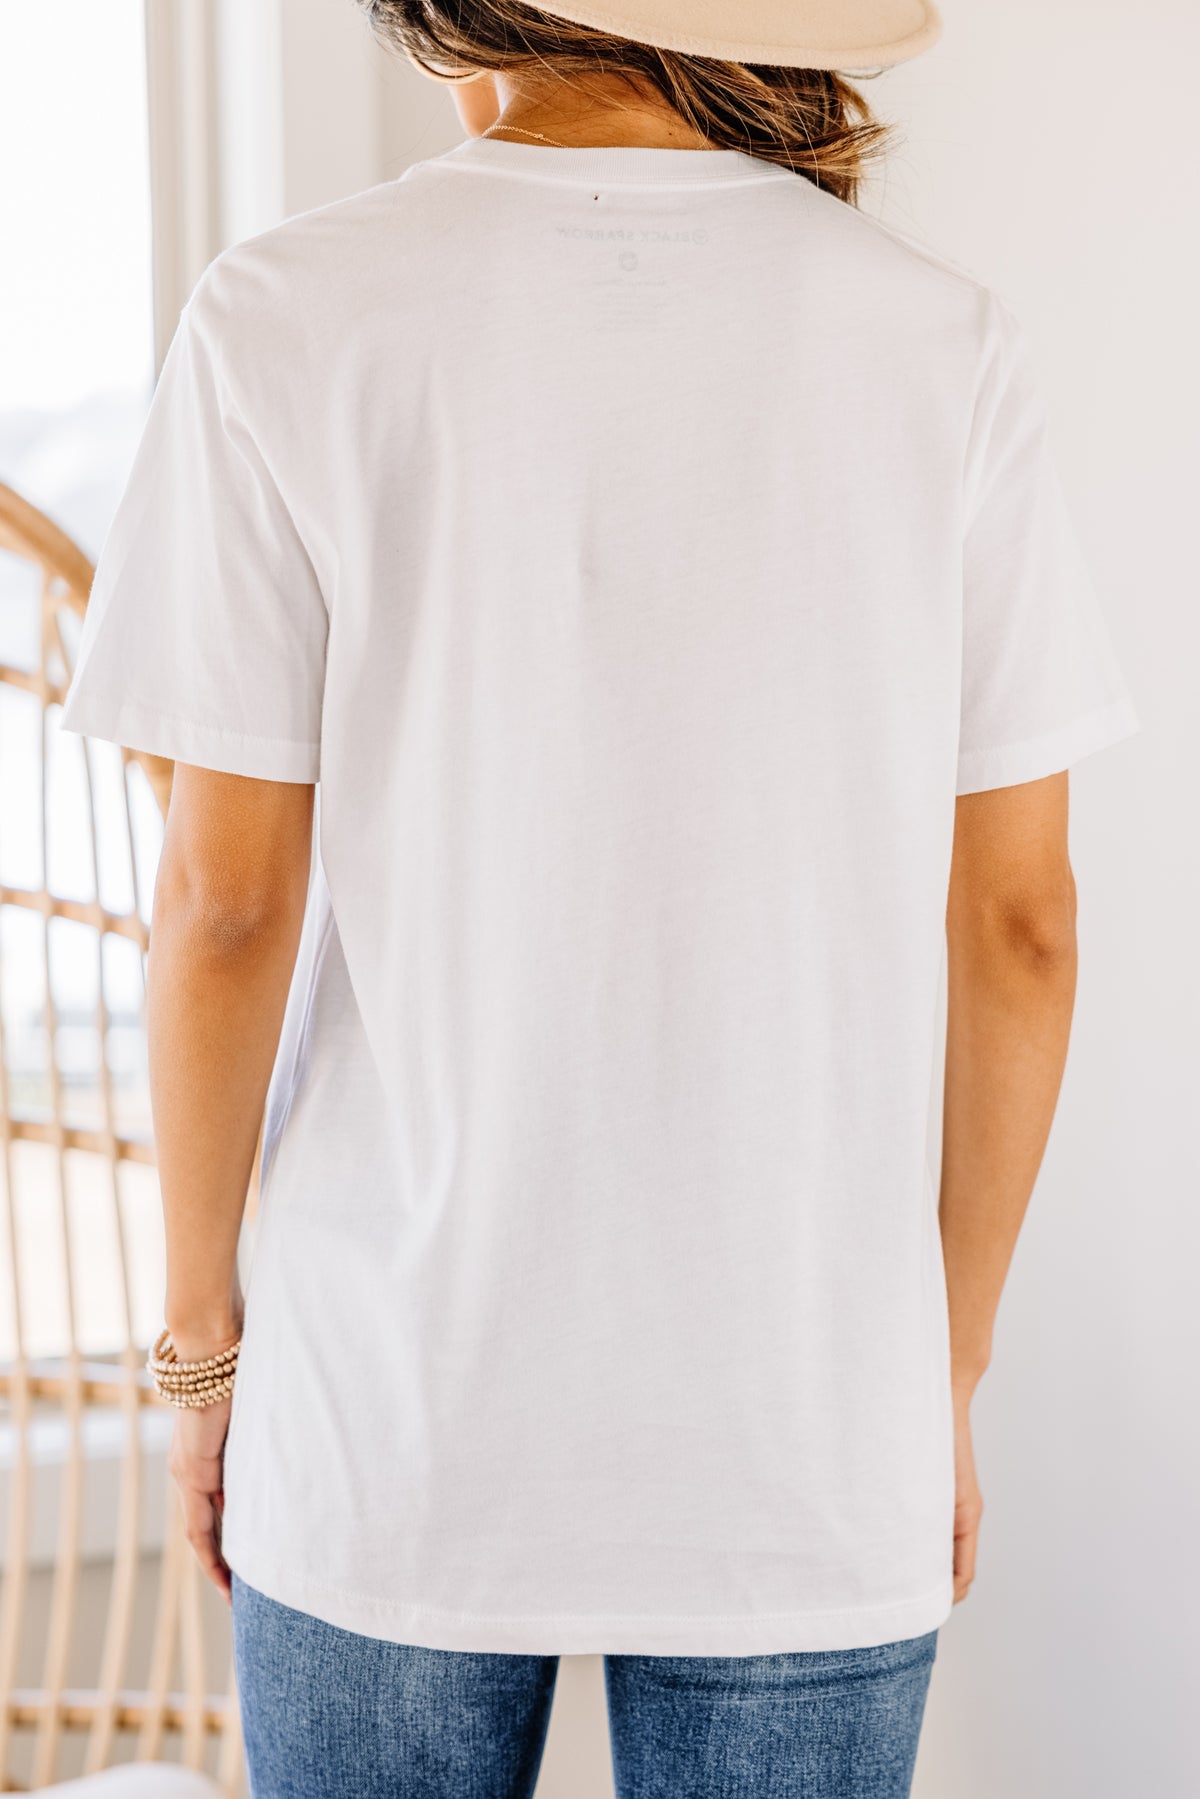 Fun White Graphic Tee - Outdoorsy Graphic Tee – Shop the Mint